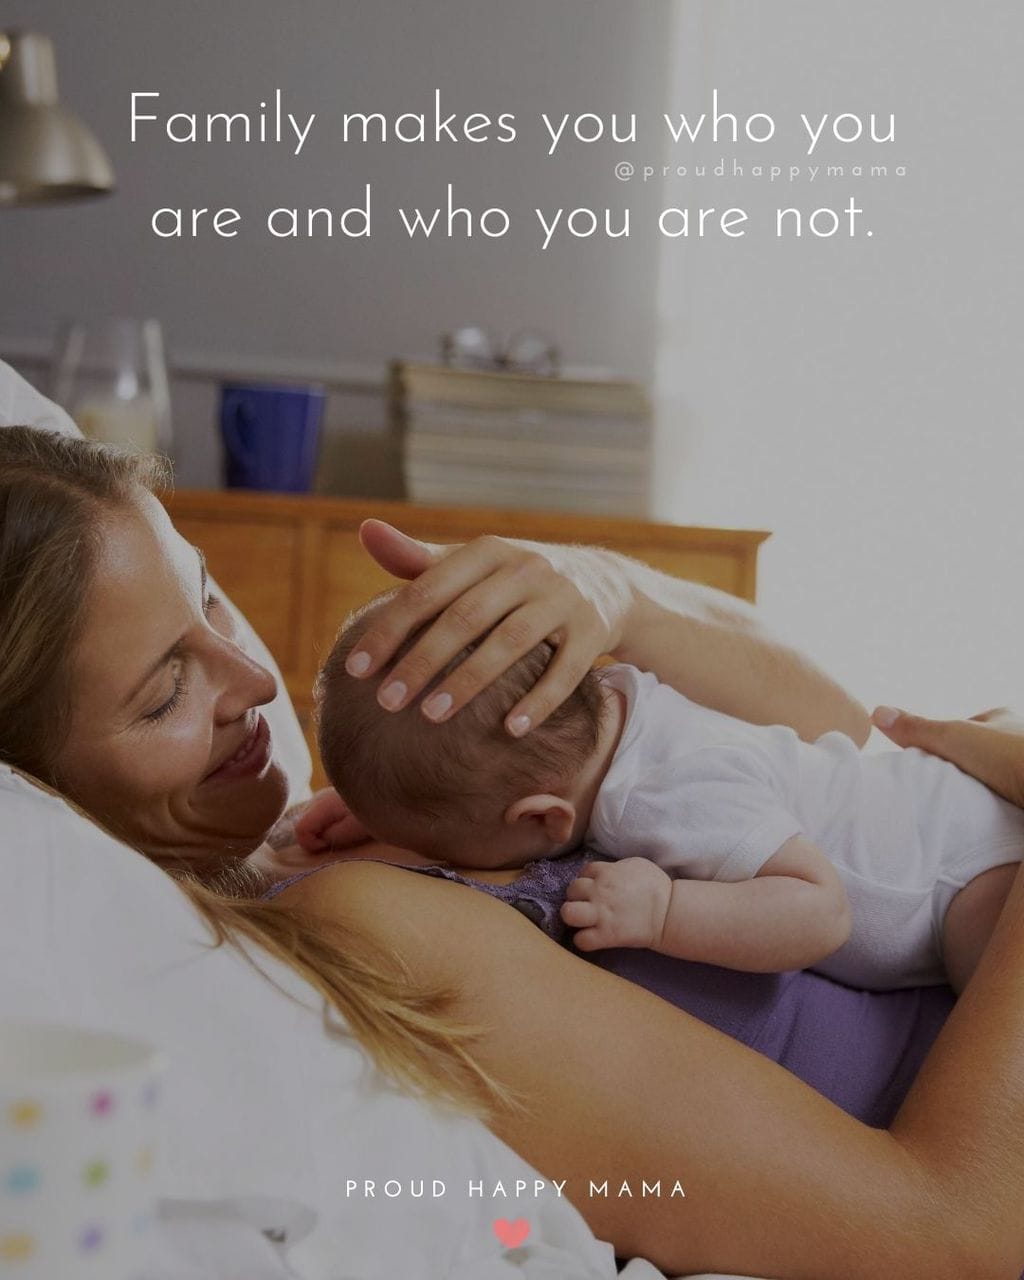 Love Quotes For Family | Family makes you who you are and who you are not.